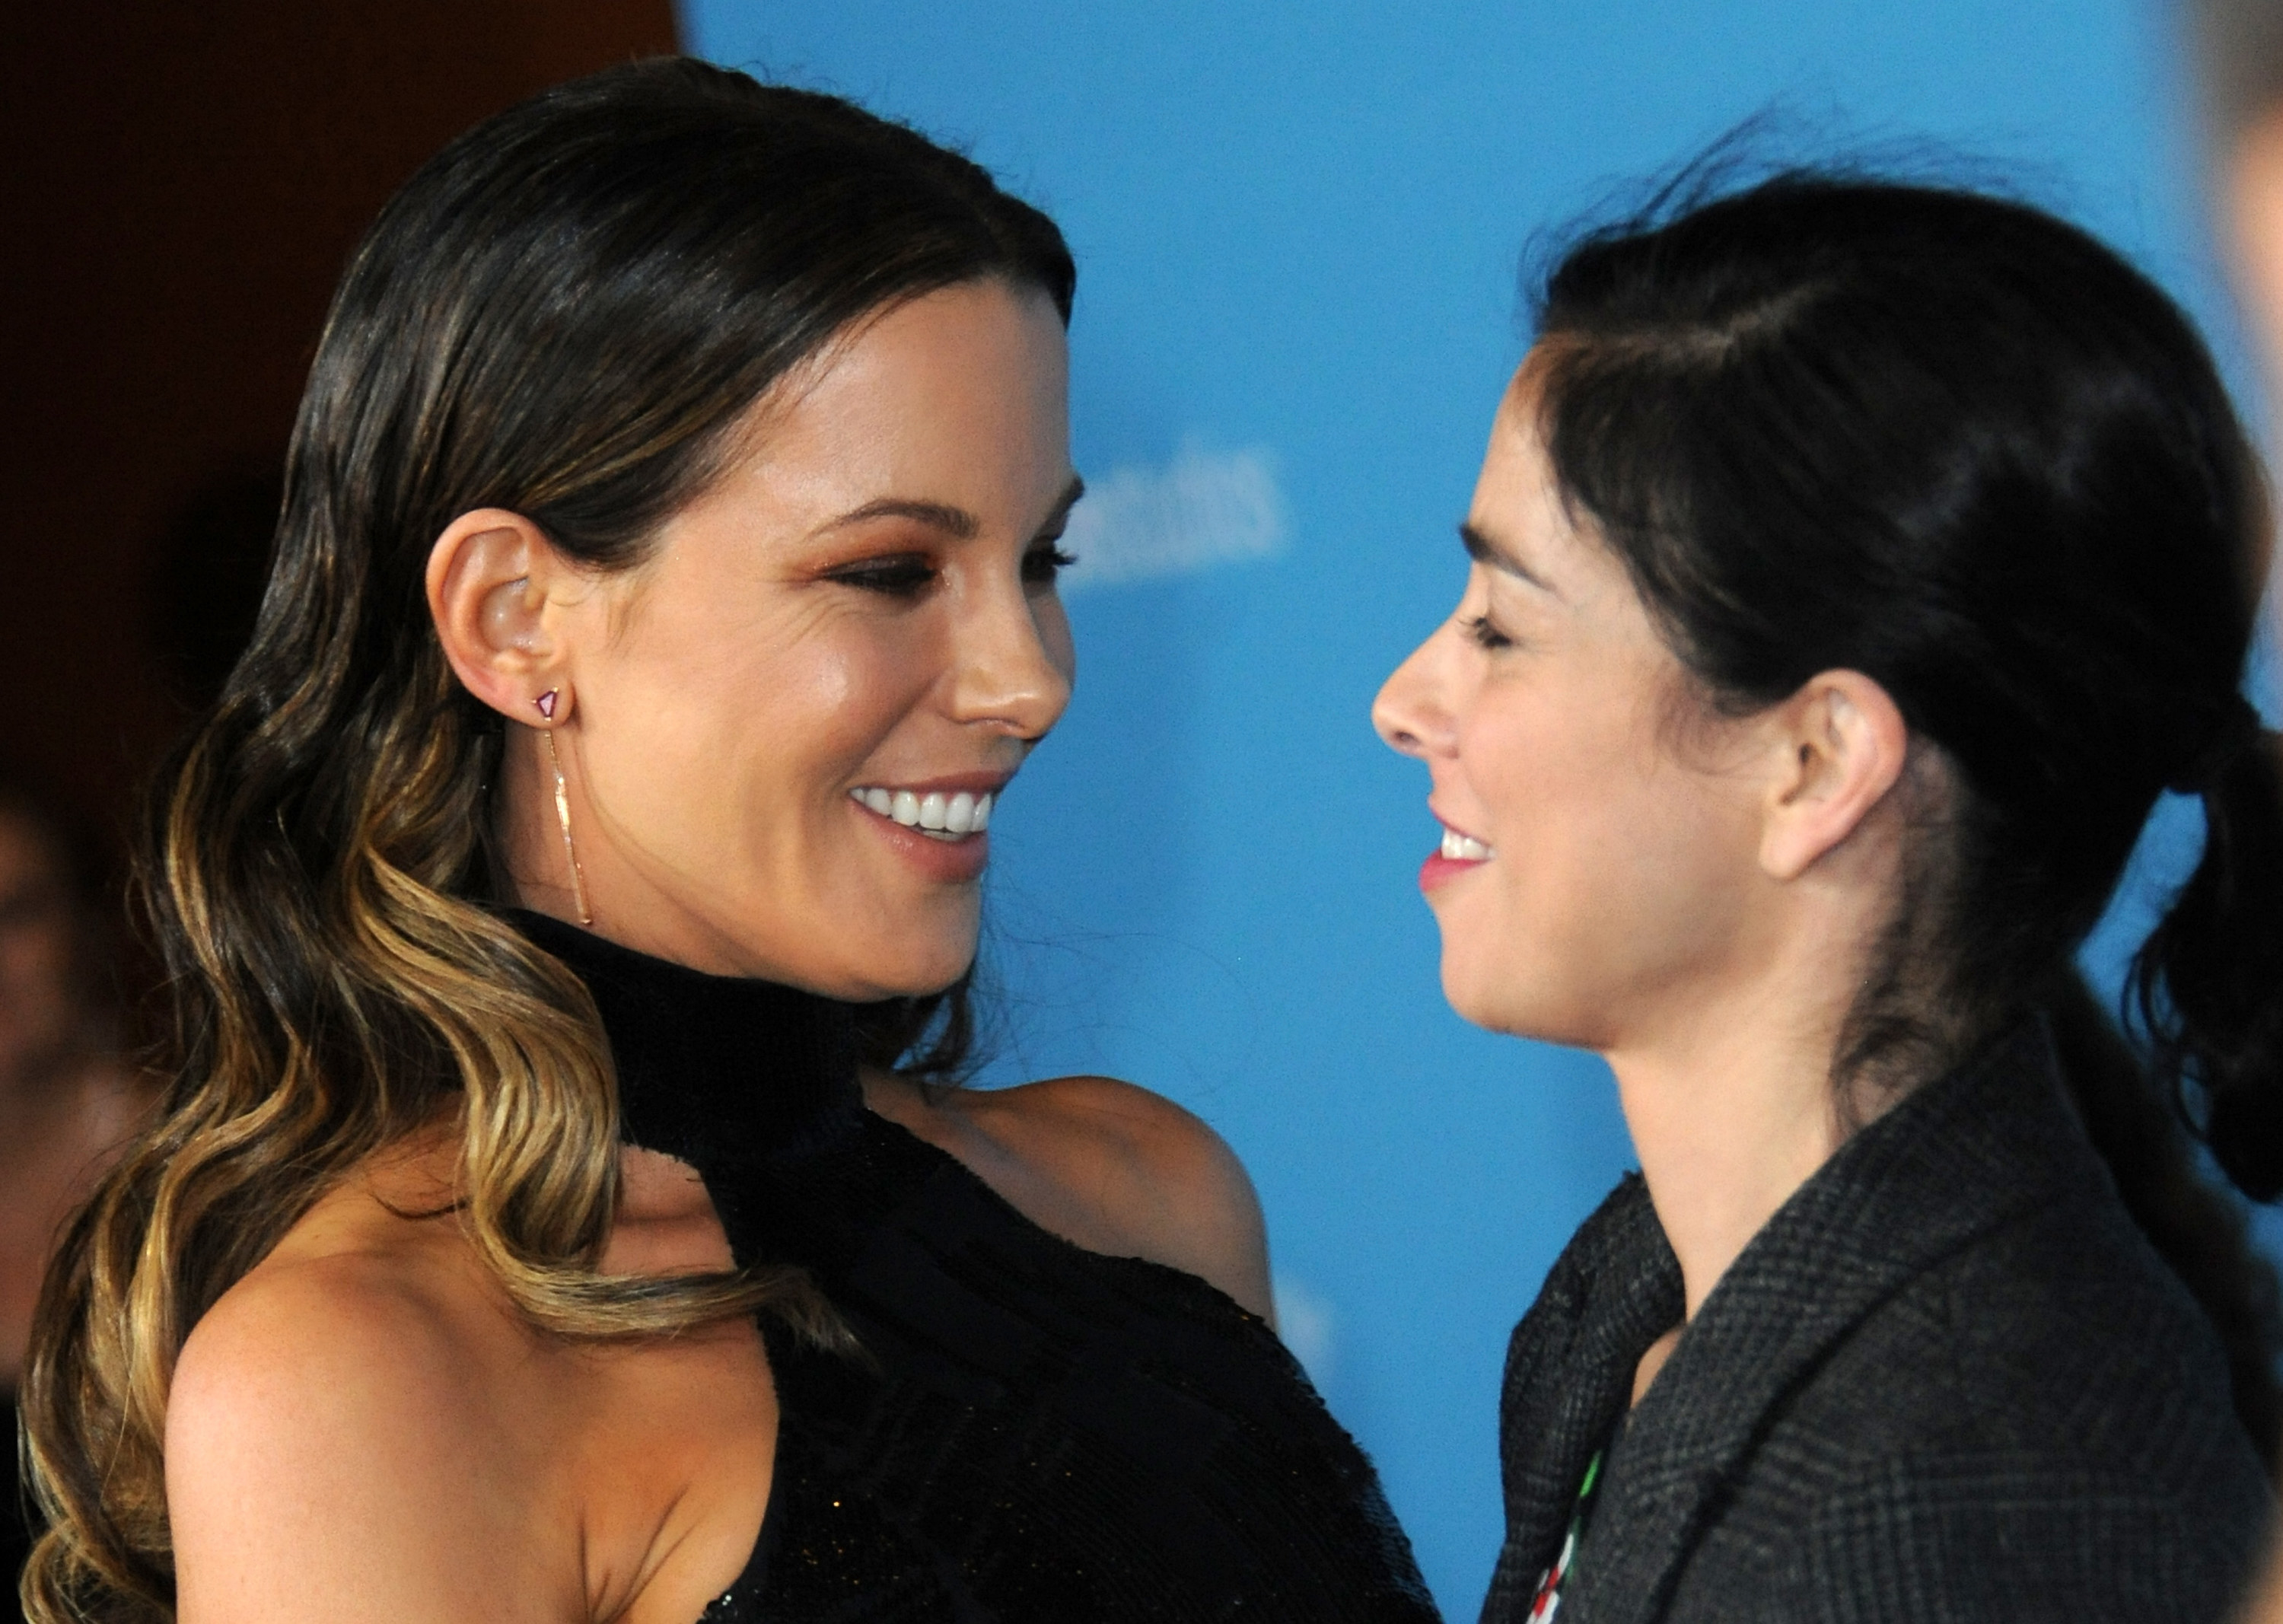 Kate Beckinsale and Sarah Silverman smiling at each other